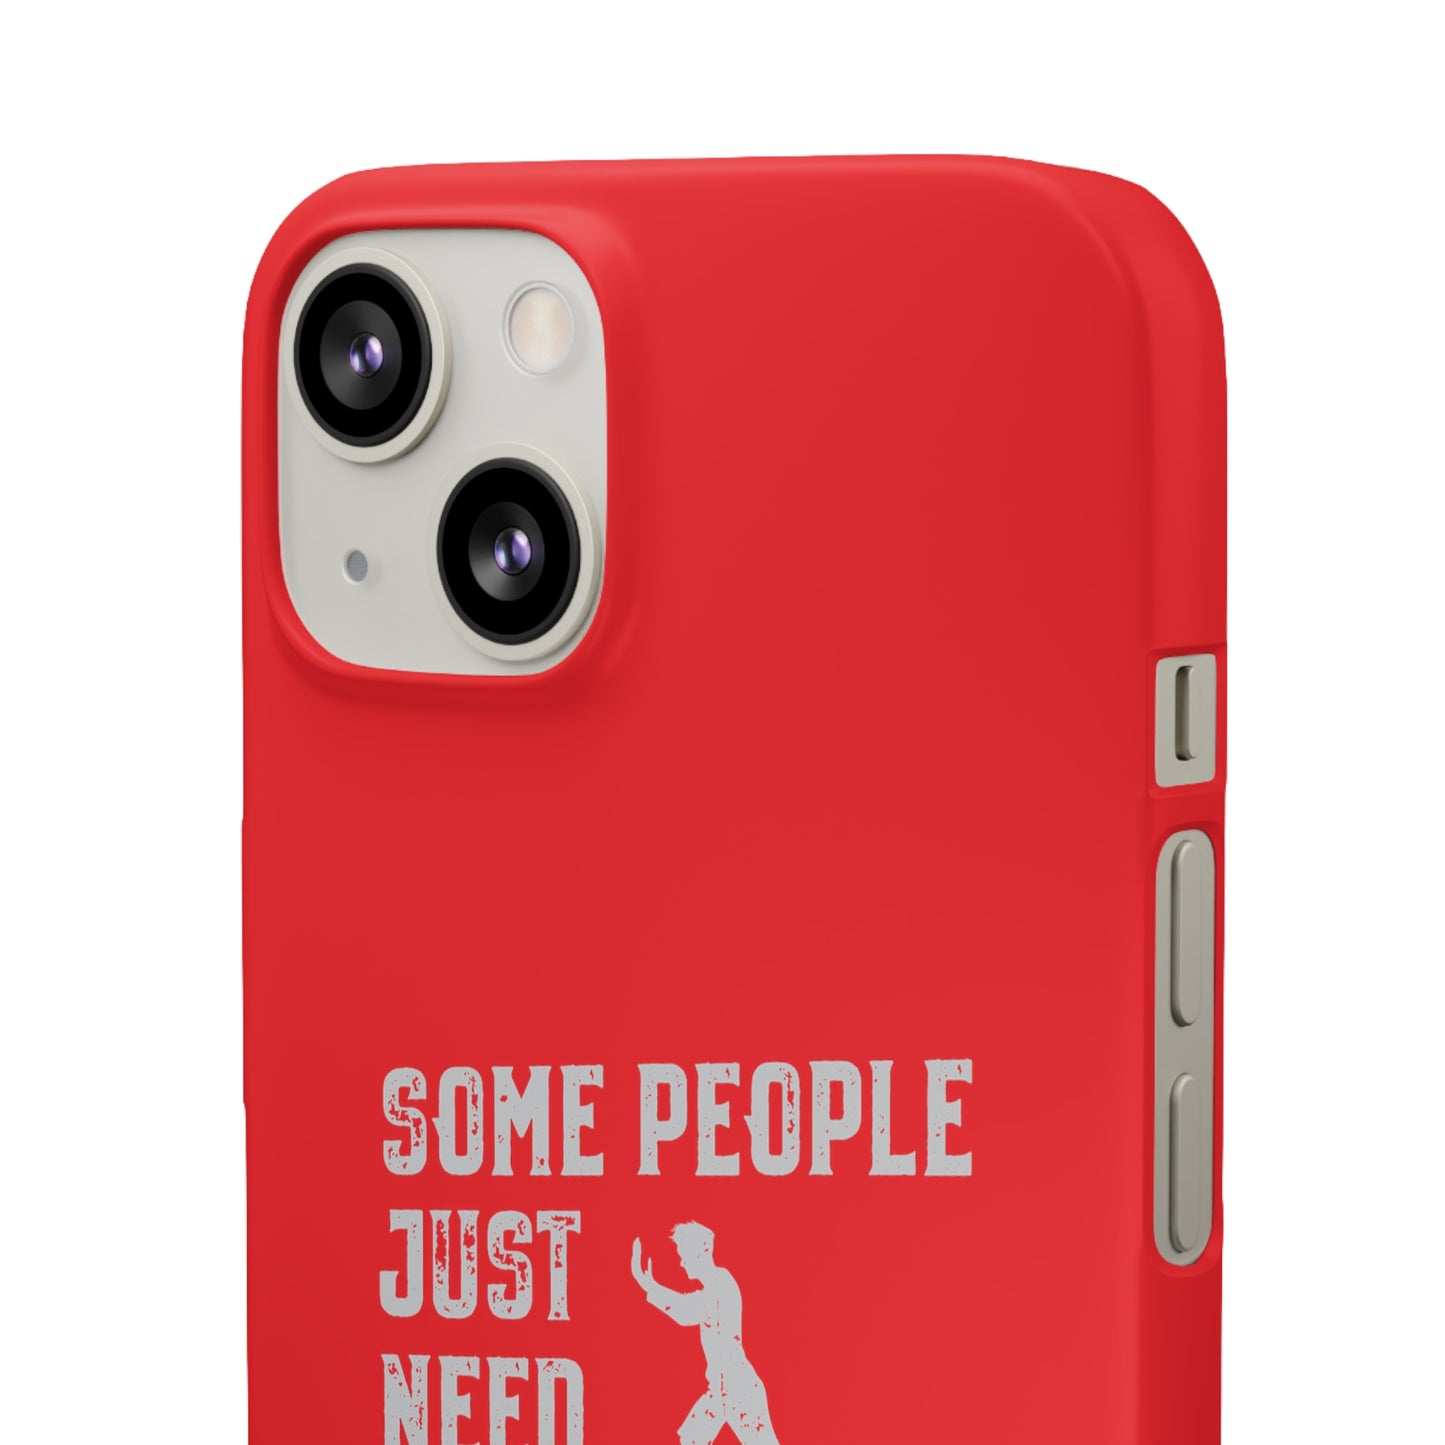 Some People Just Need A Pat On the Back Phone Case